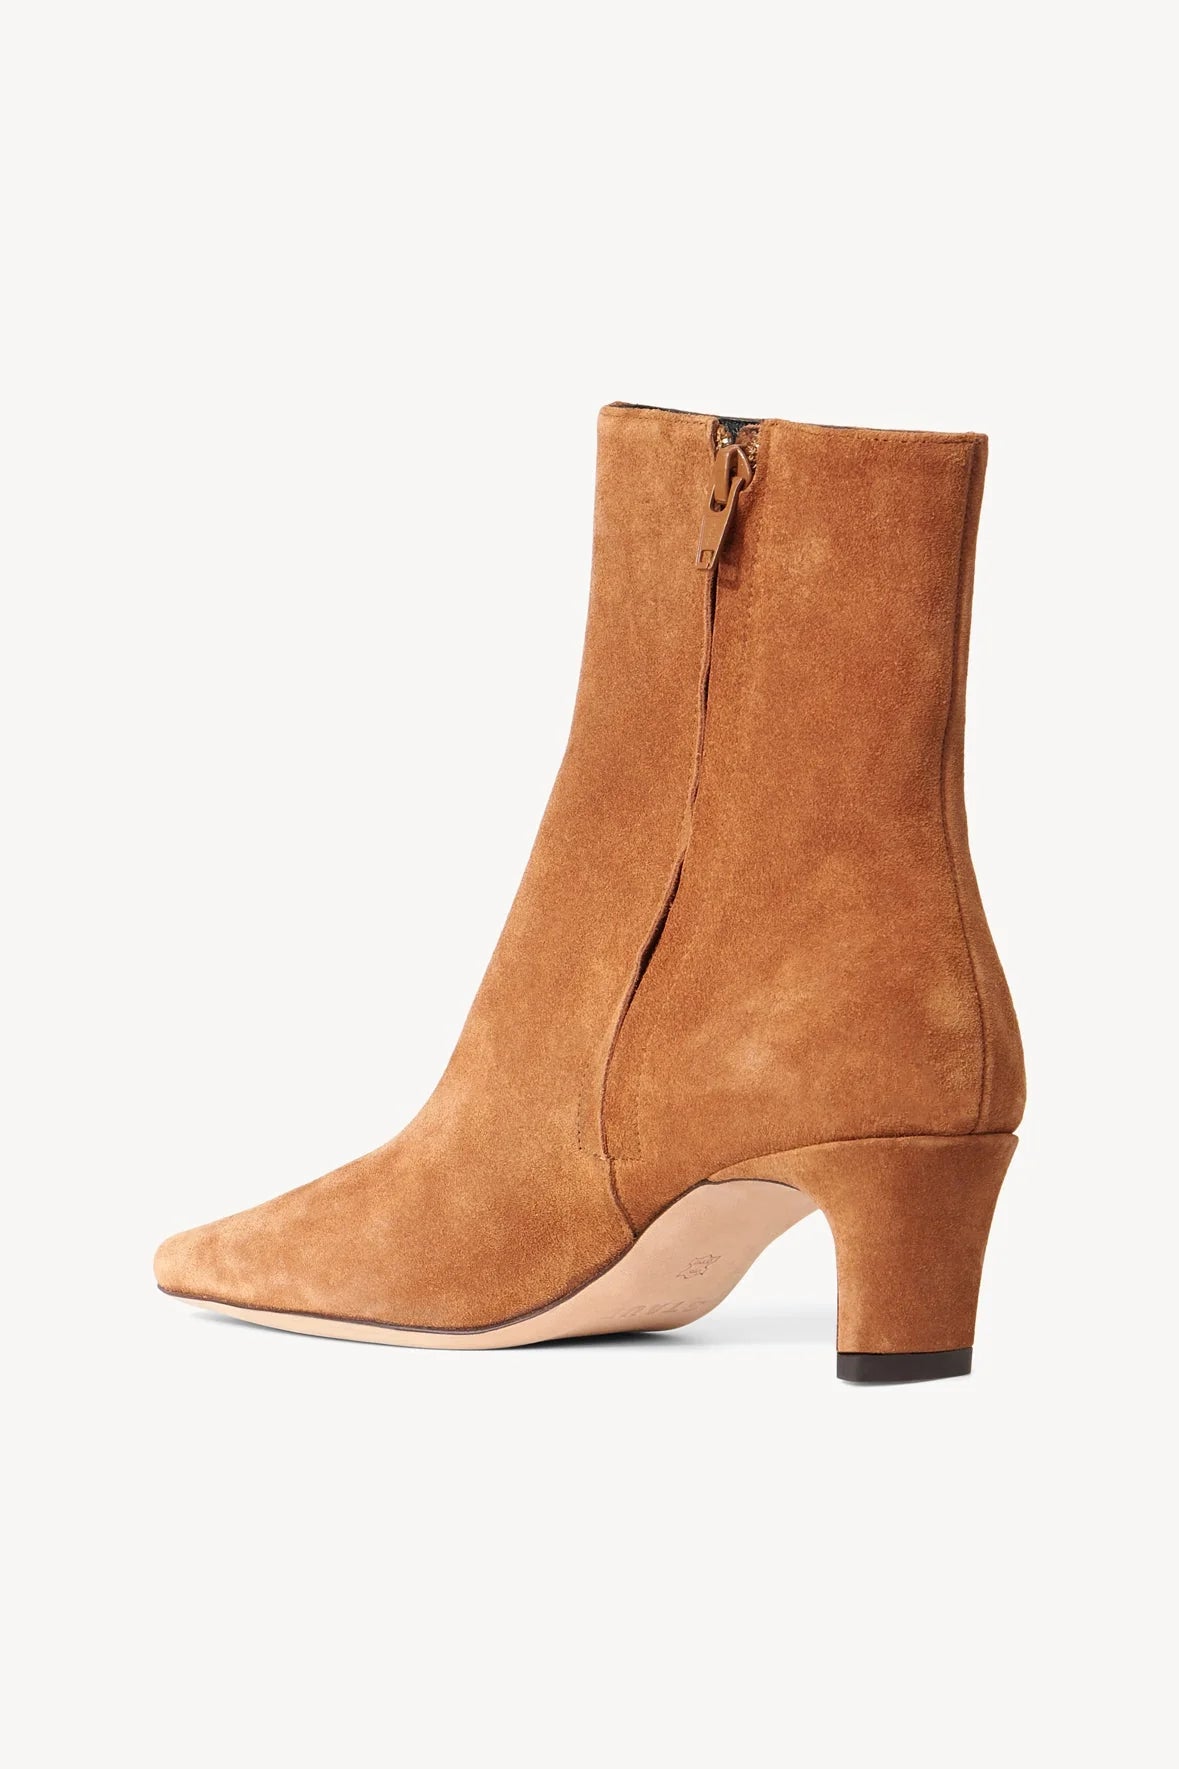 WALLY ANKLE BOOT - TAN SUEDE